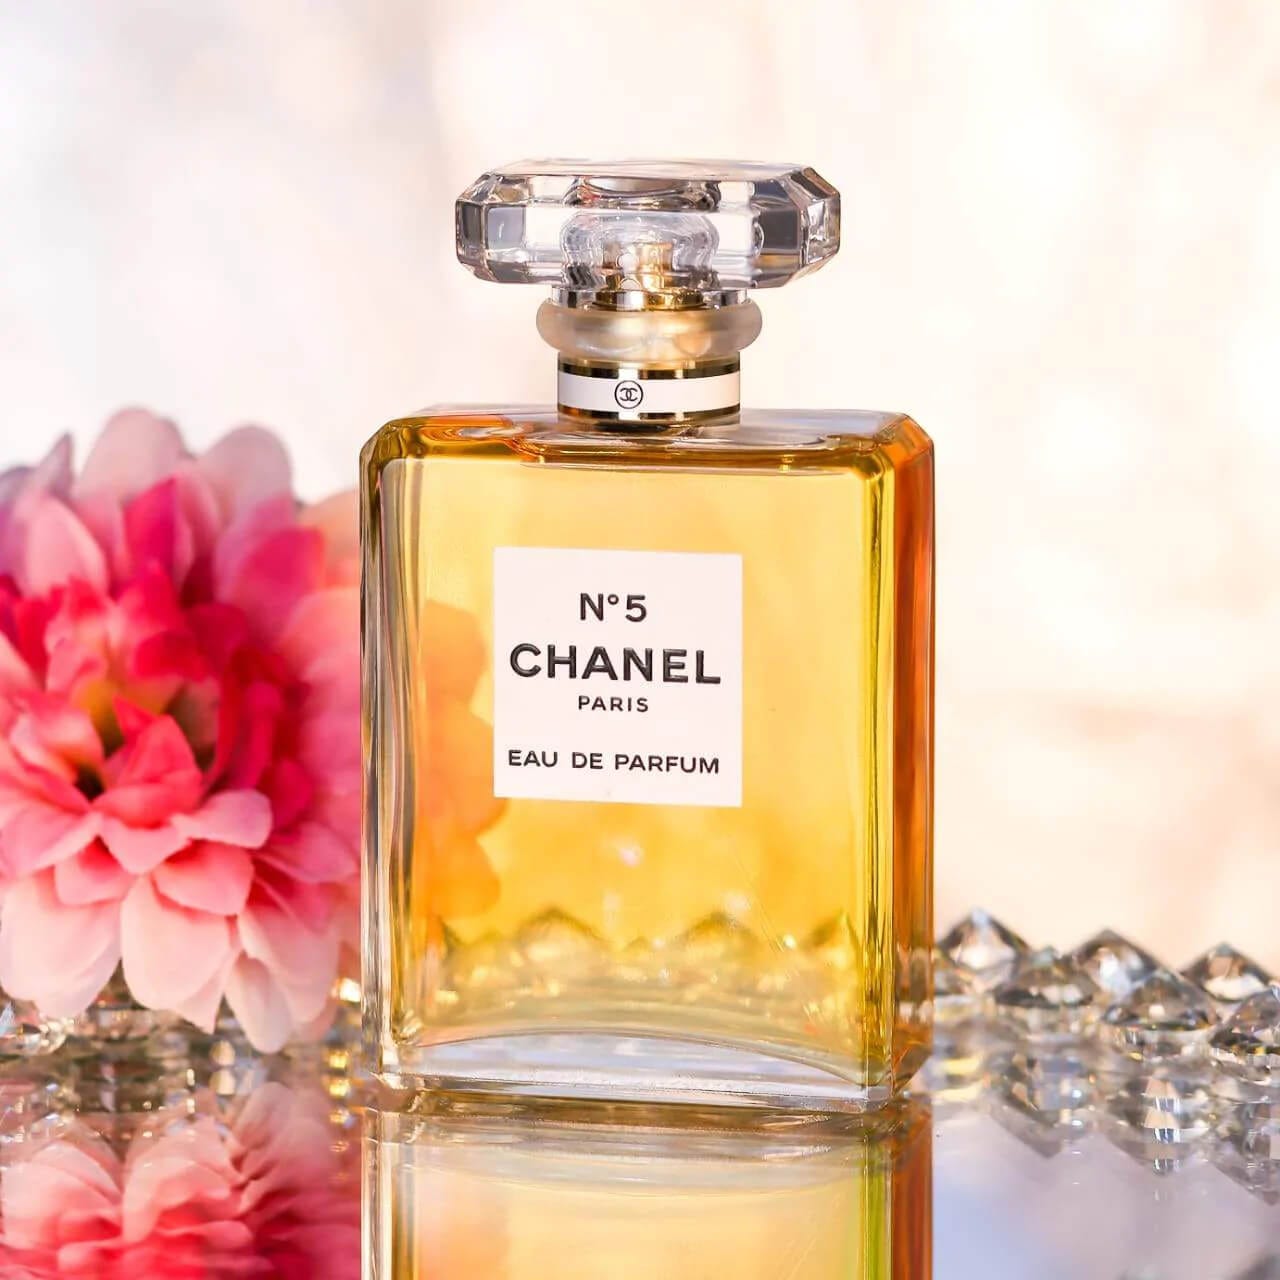 N5 Chanel Perfume. The most popular Chanel fragrances are… | by Mehwish |  Medium